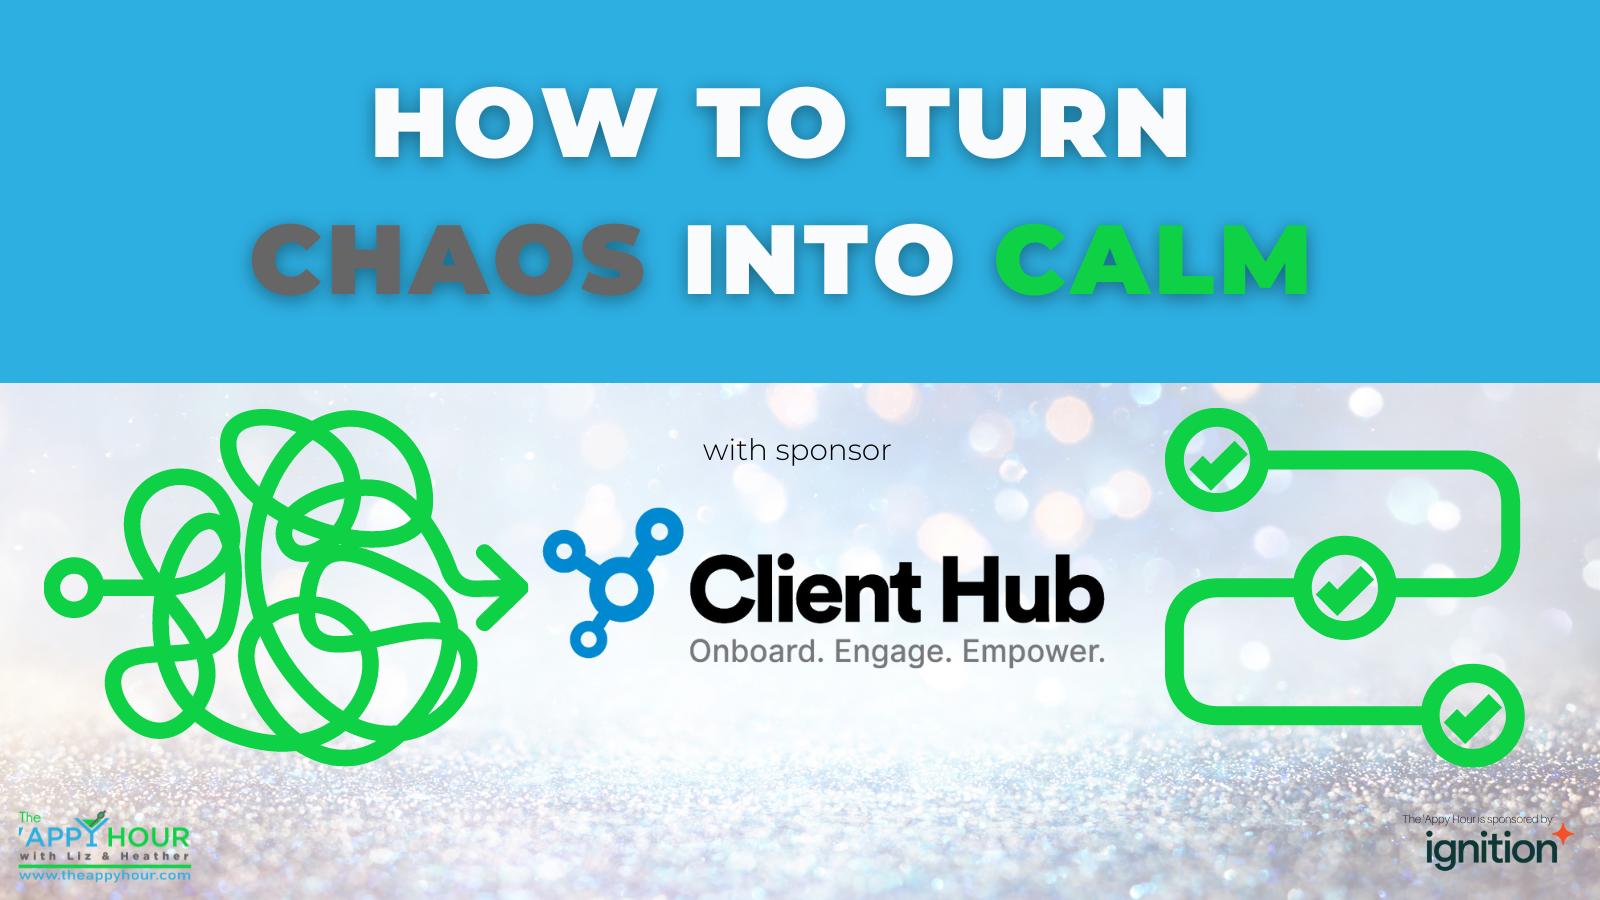 How to turn chaos into calm with Client Hub